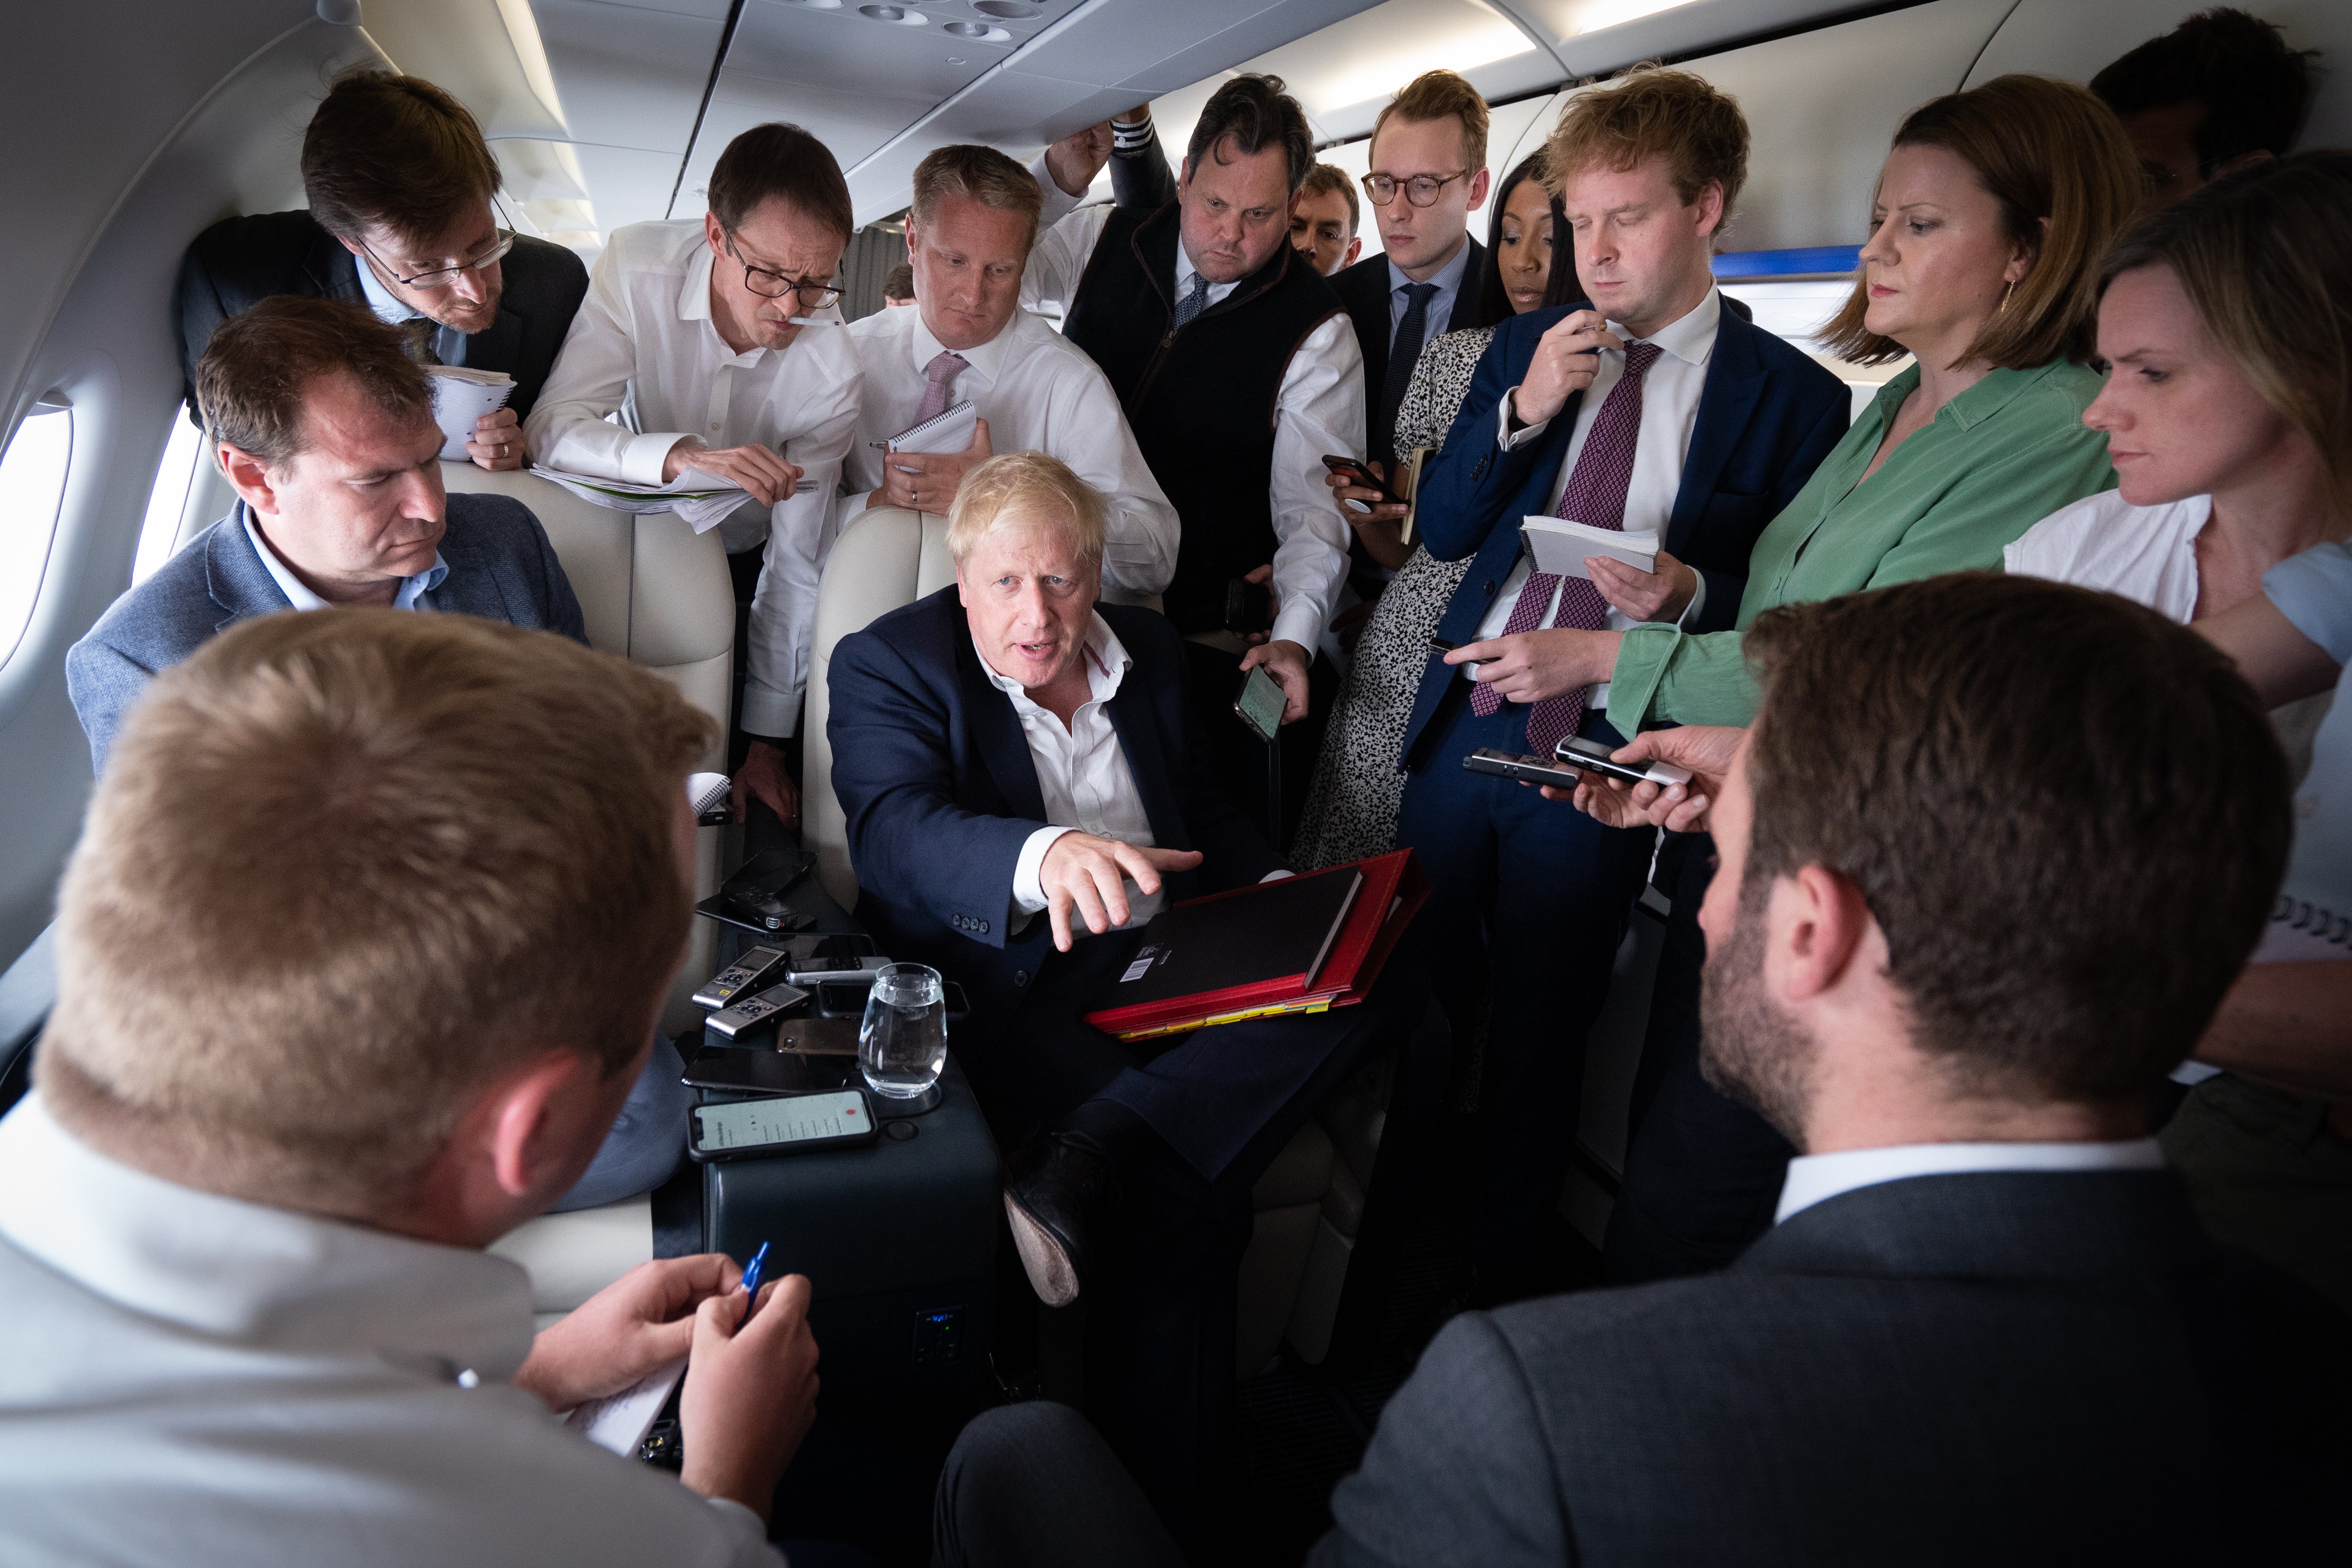 Prime Minister Boris Johnson talks to journalists on his plane during a flight from Germany where he was attending the G7 Summit to the Nato summit (Stefan Rousseau/PA)